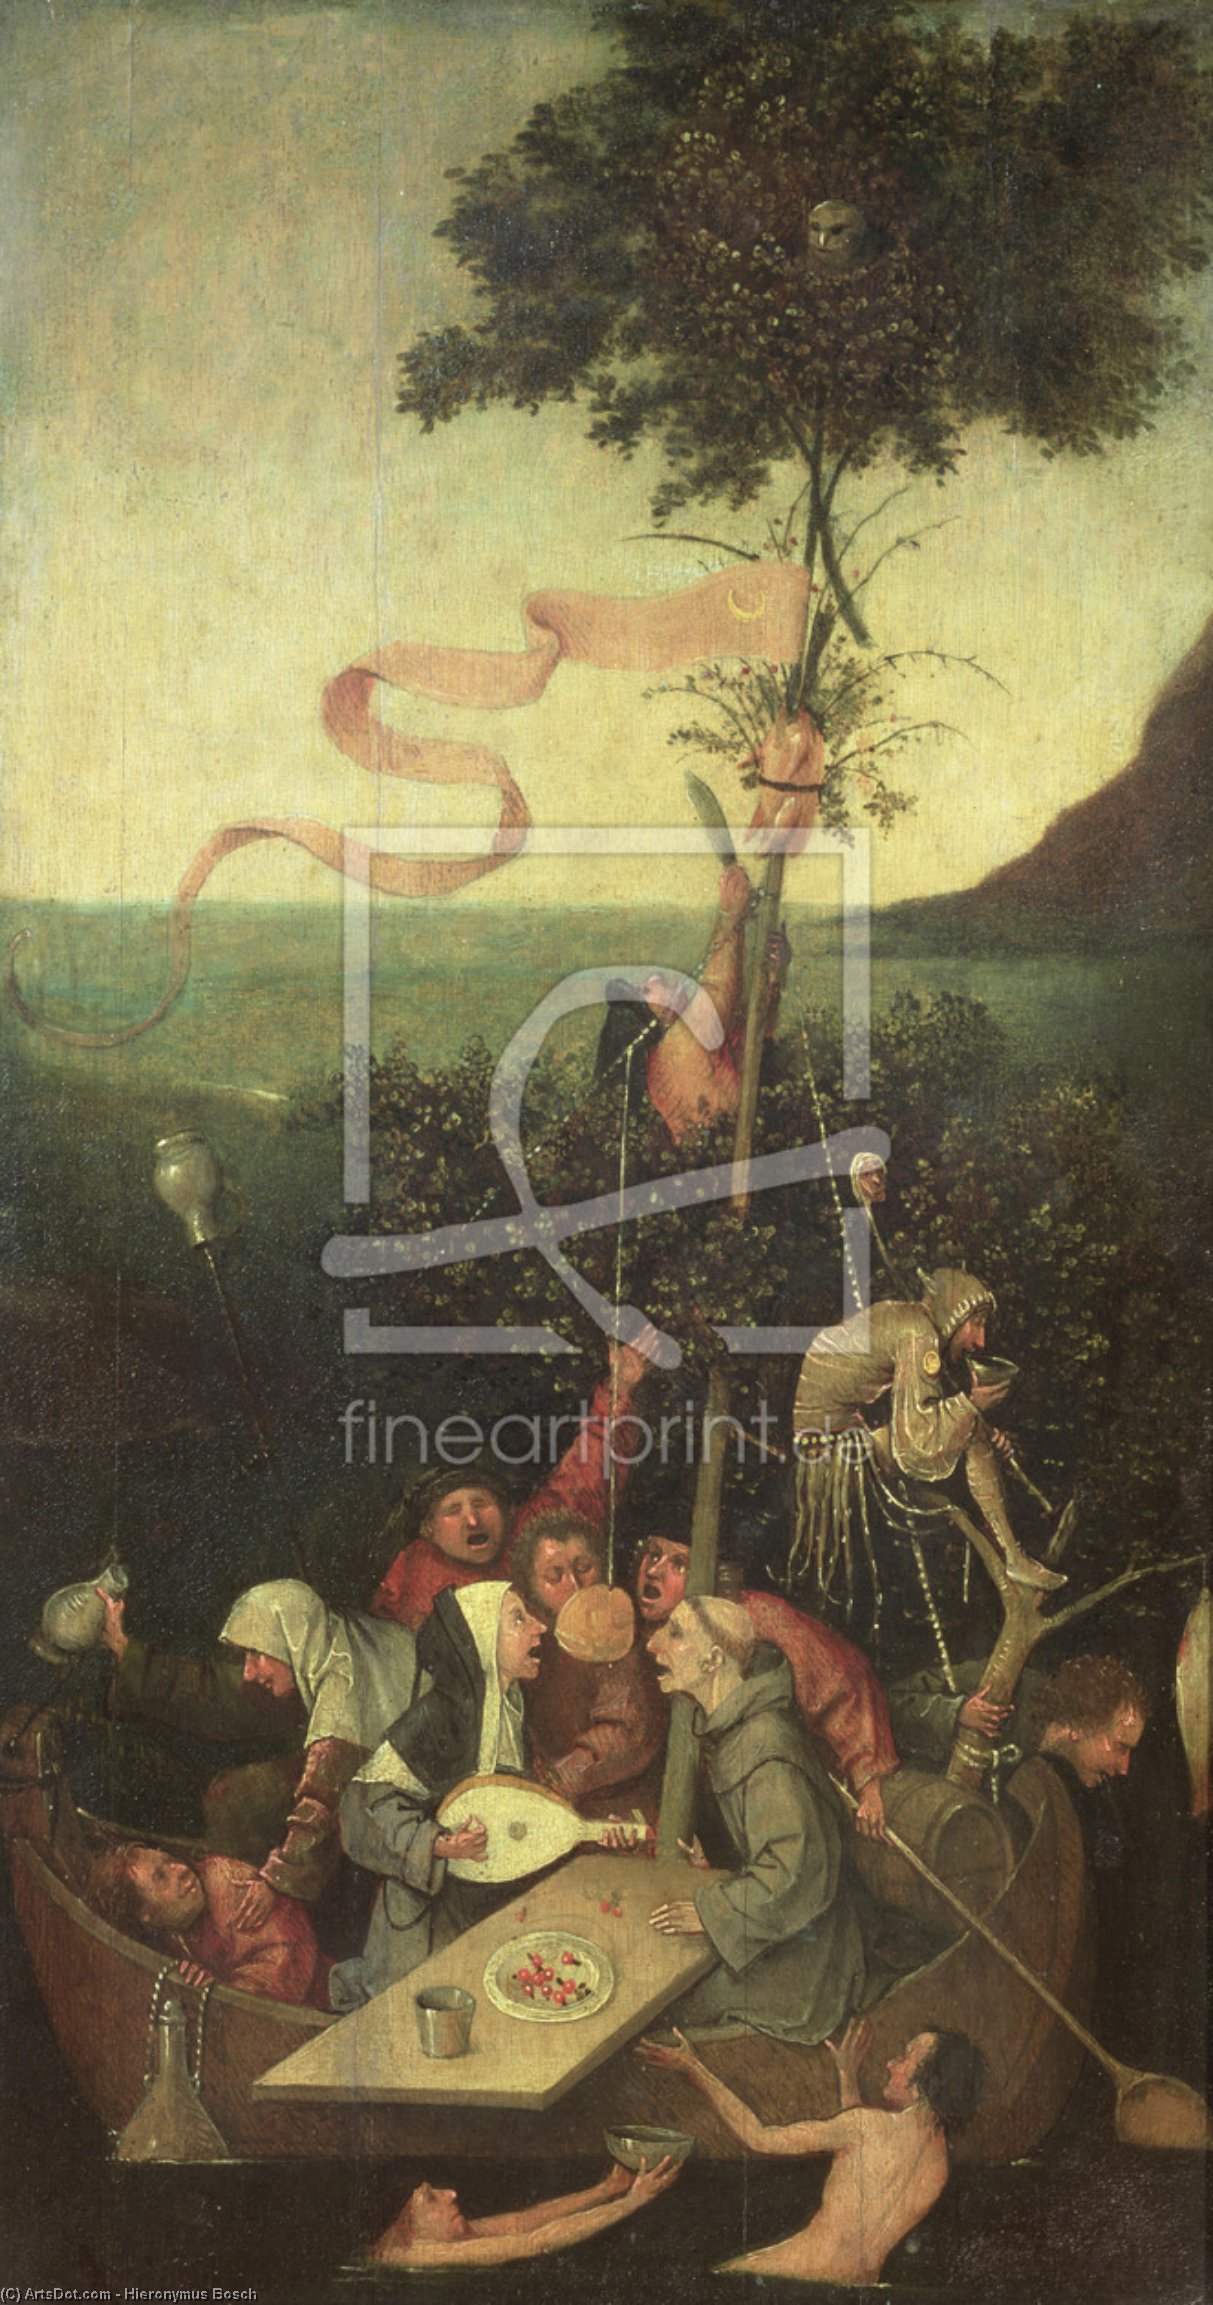 Buy Museum Art Reproductions The Ship of Fools, 1500 by Hieronymus Bosch (1450-1516, Netherlands) | ArtsDot.com